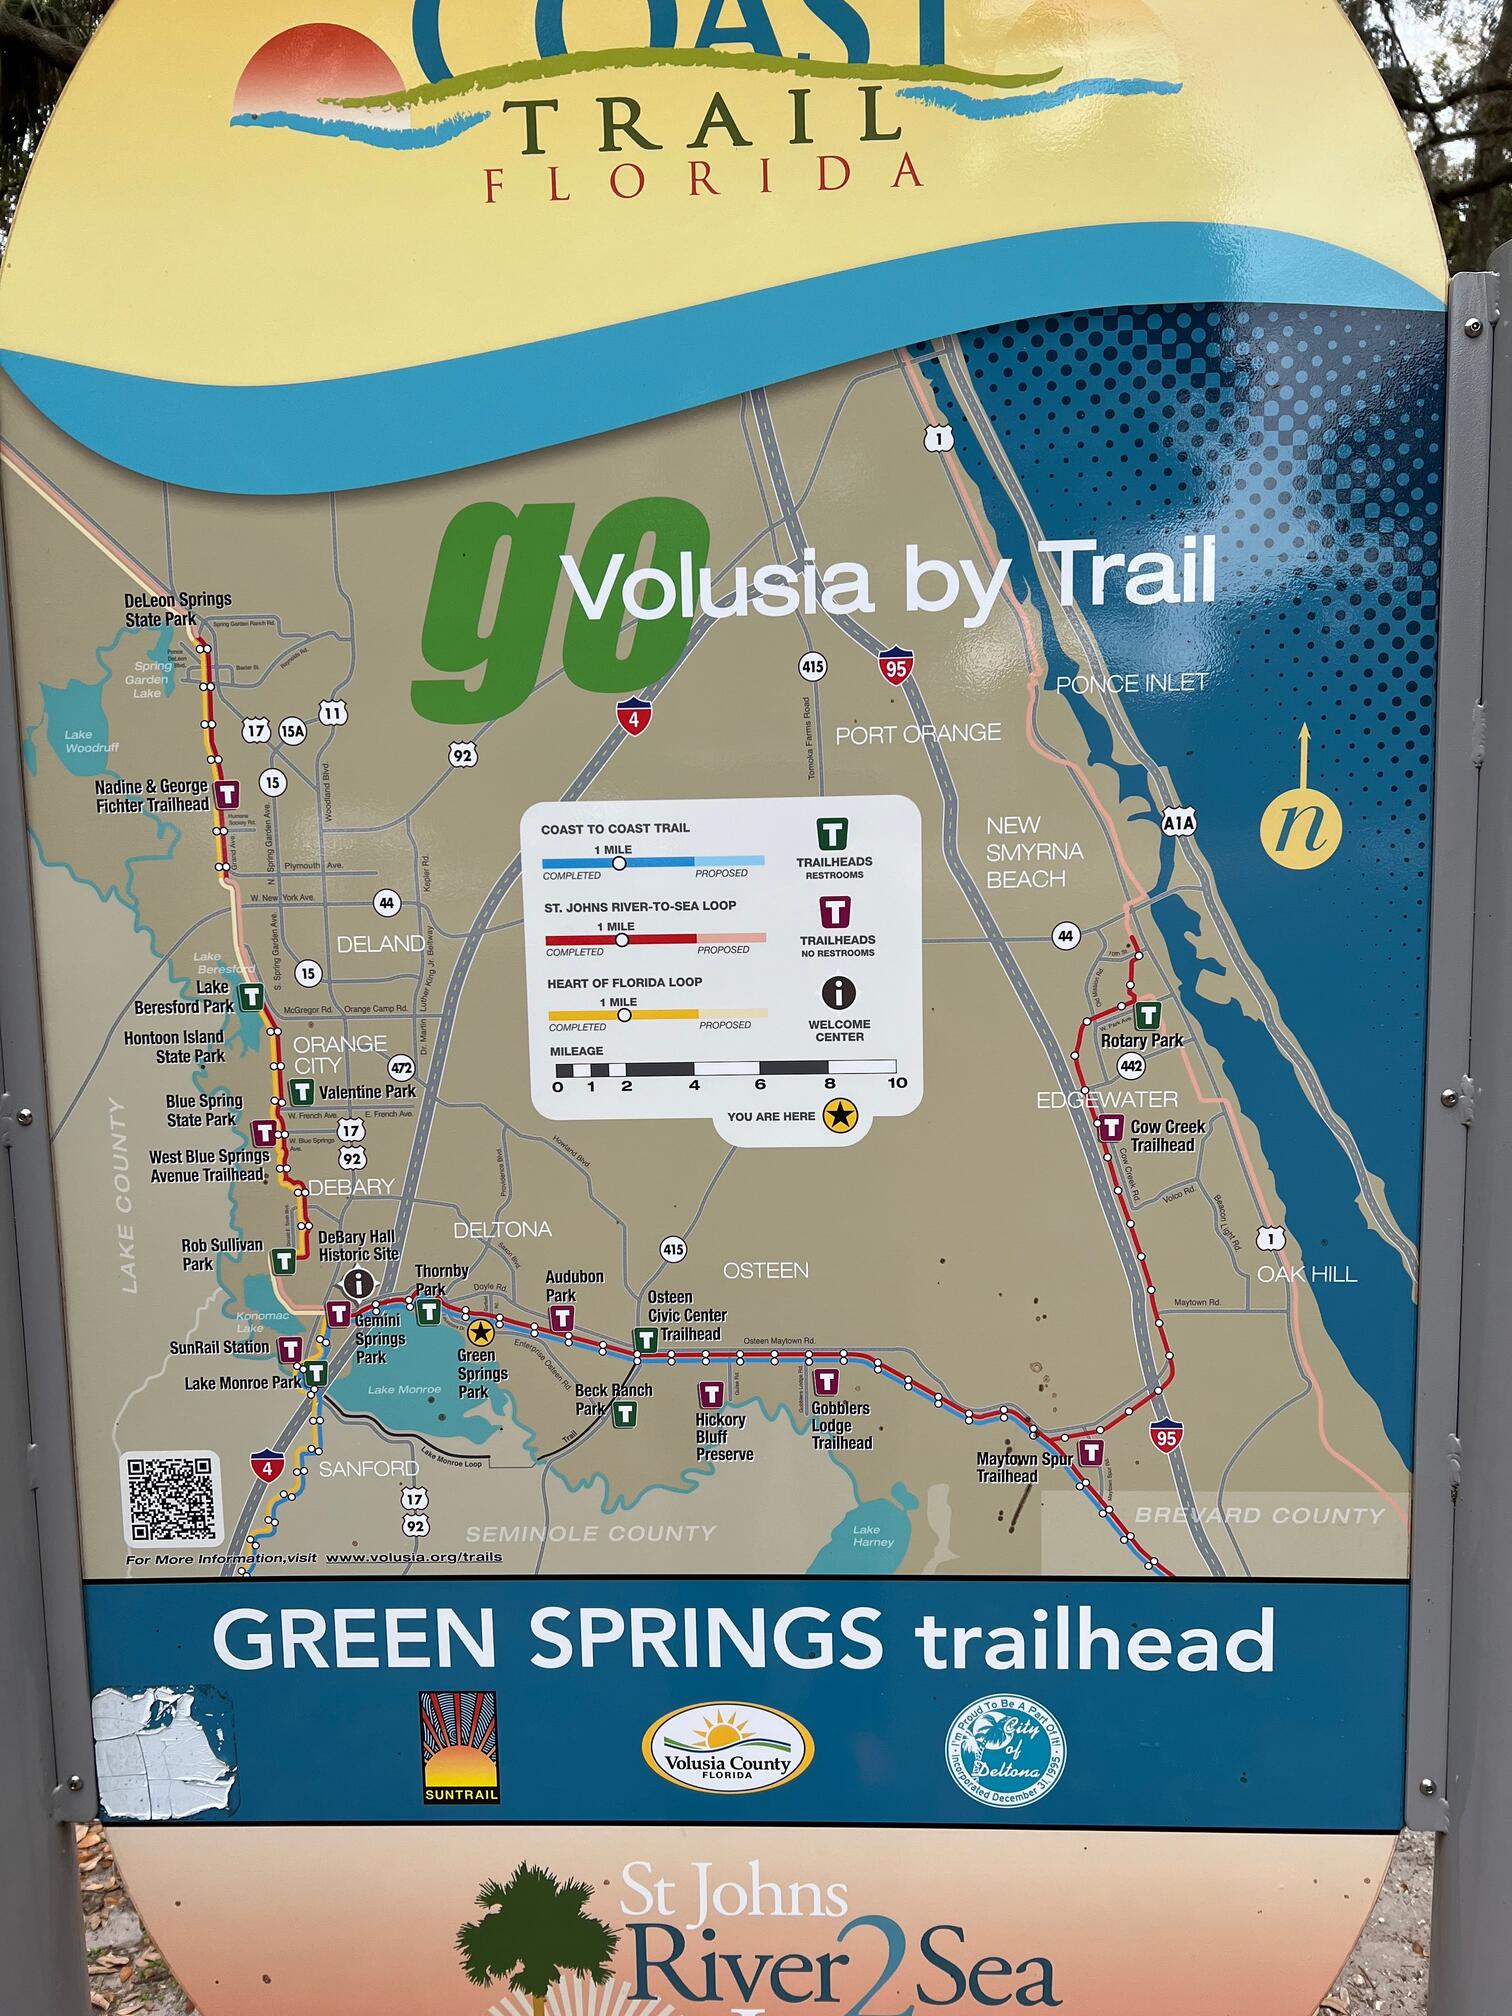 Volusia by Trail map